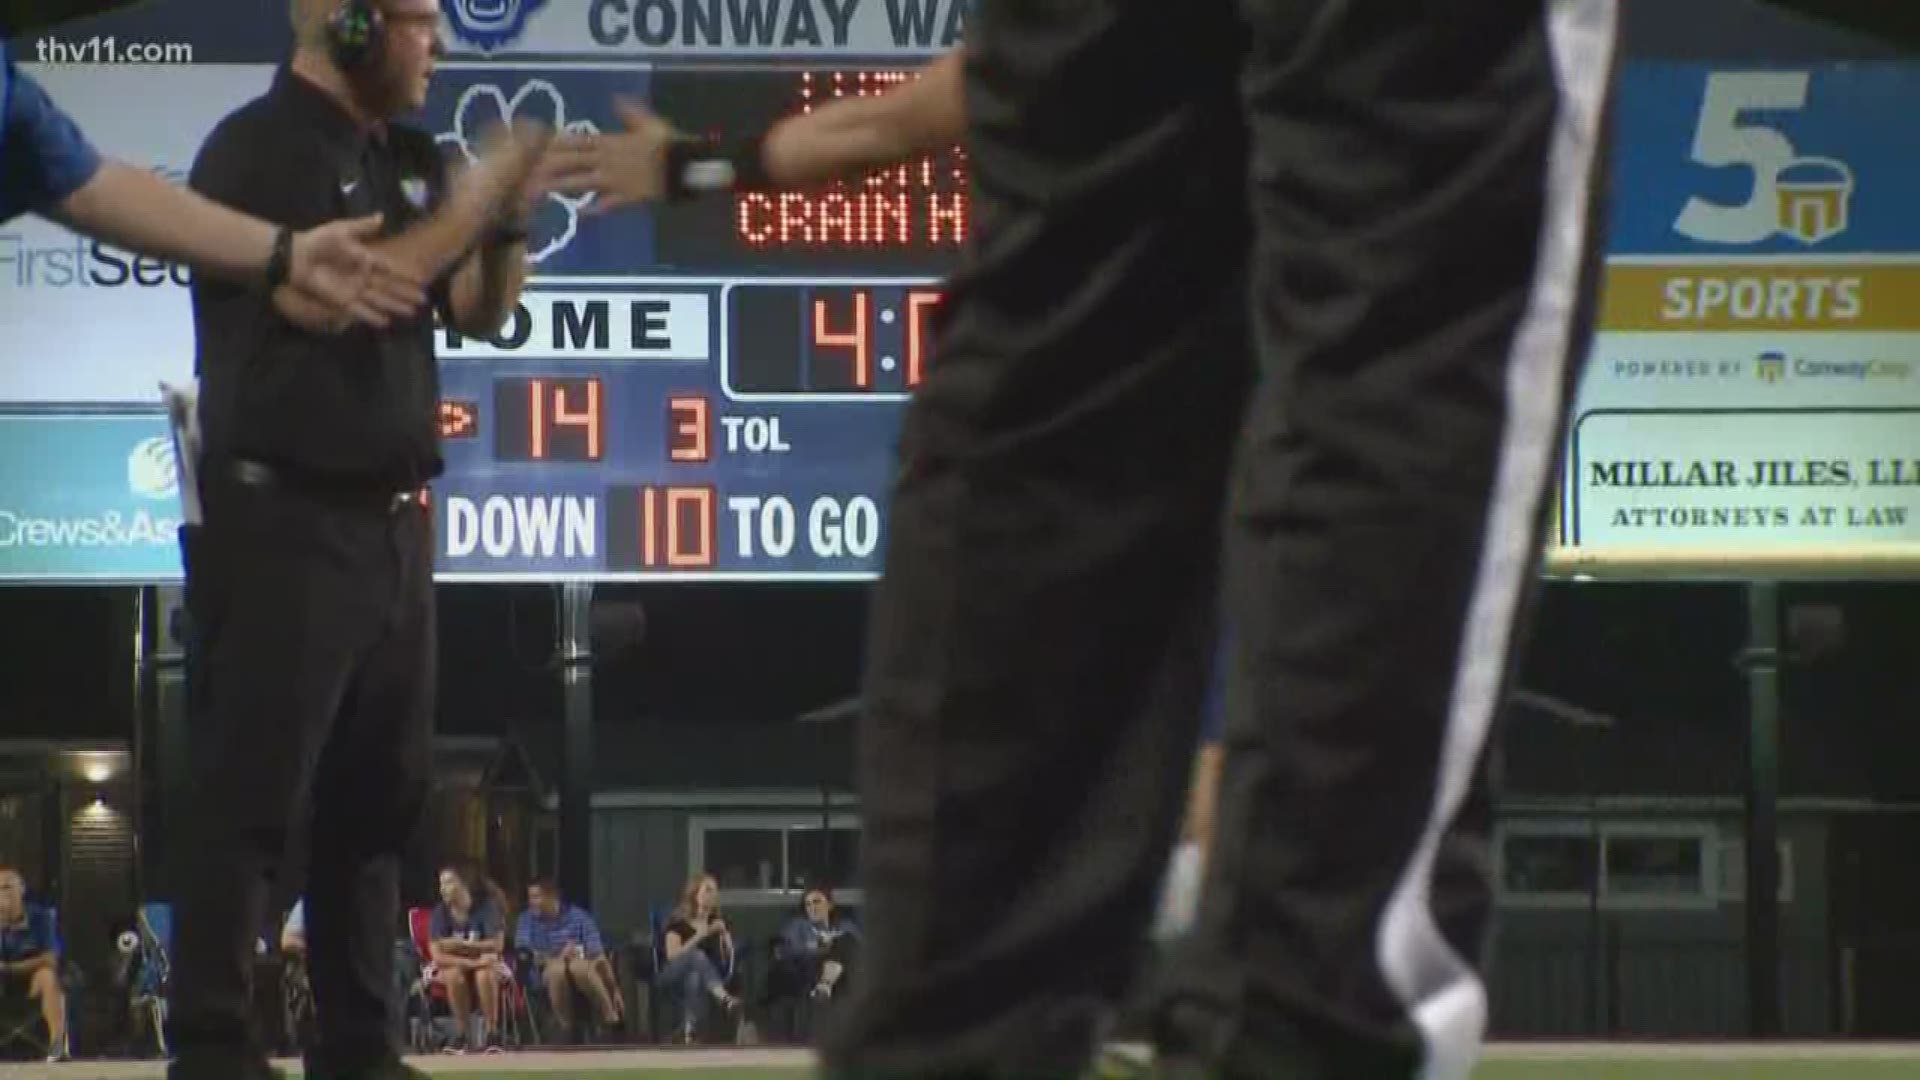 Fort Smith Southside falls to Conway 42-21